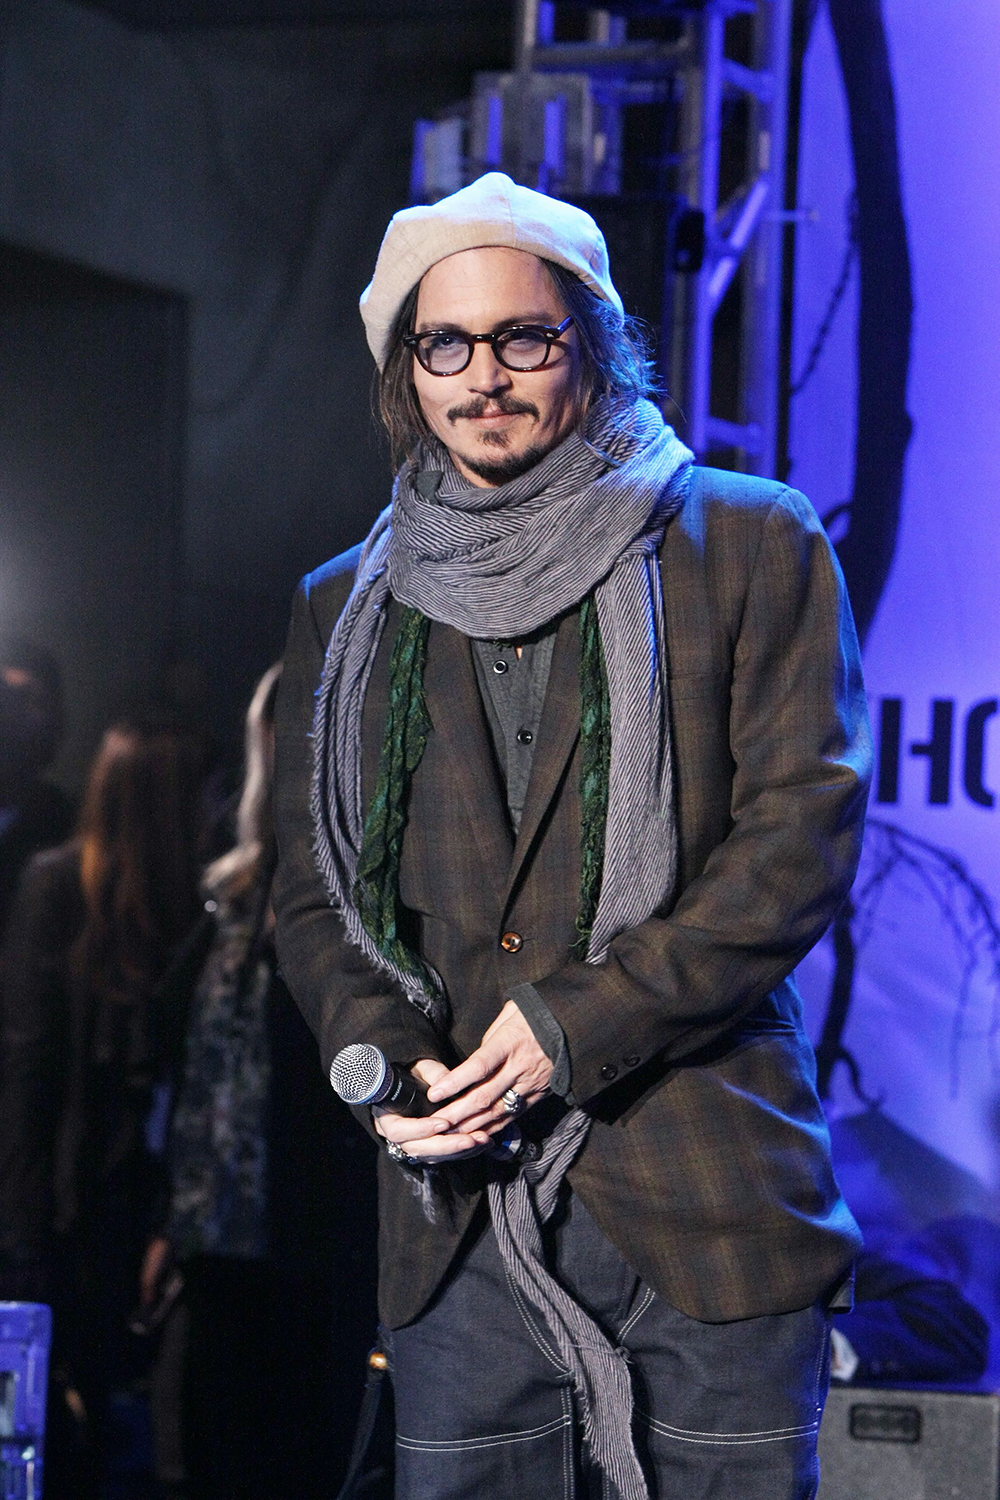 <p>Johnny Depp bundles up a fan event celebrating ‘Alice In Wonderland’ on Feb. 19, 2010. He looked vagabond-chic in a hat, plenty of scarves, and layers of jackets and cardigans.</p>